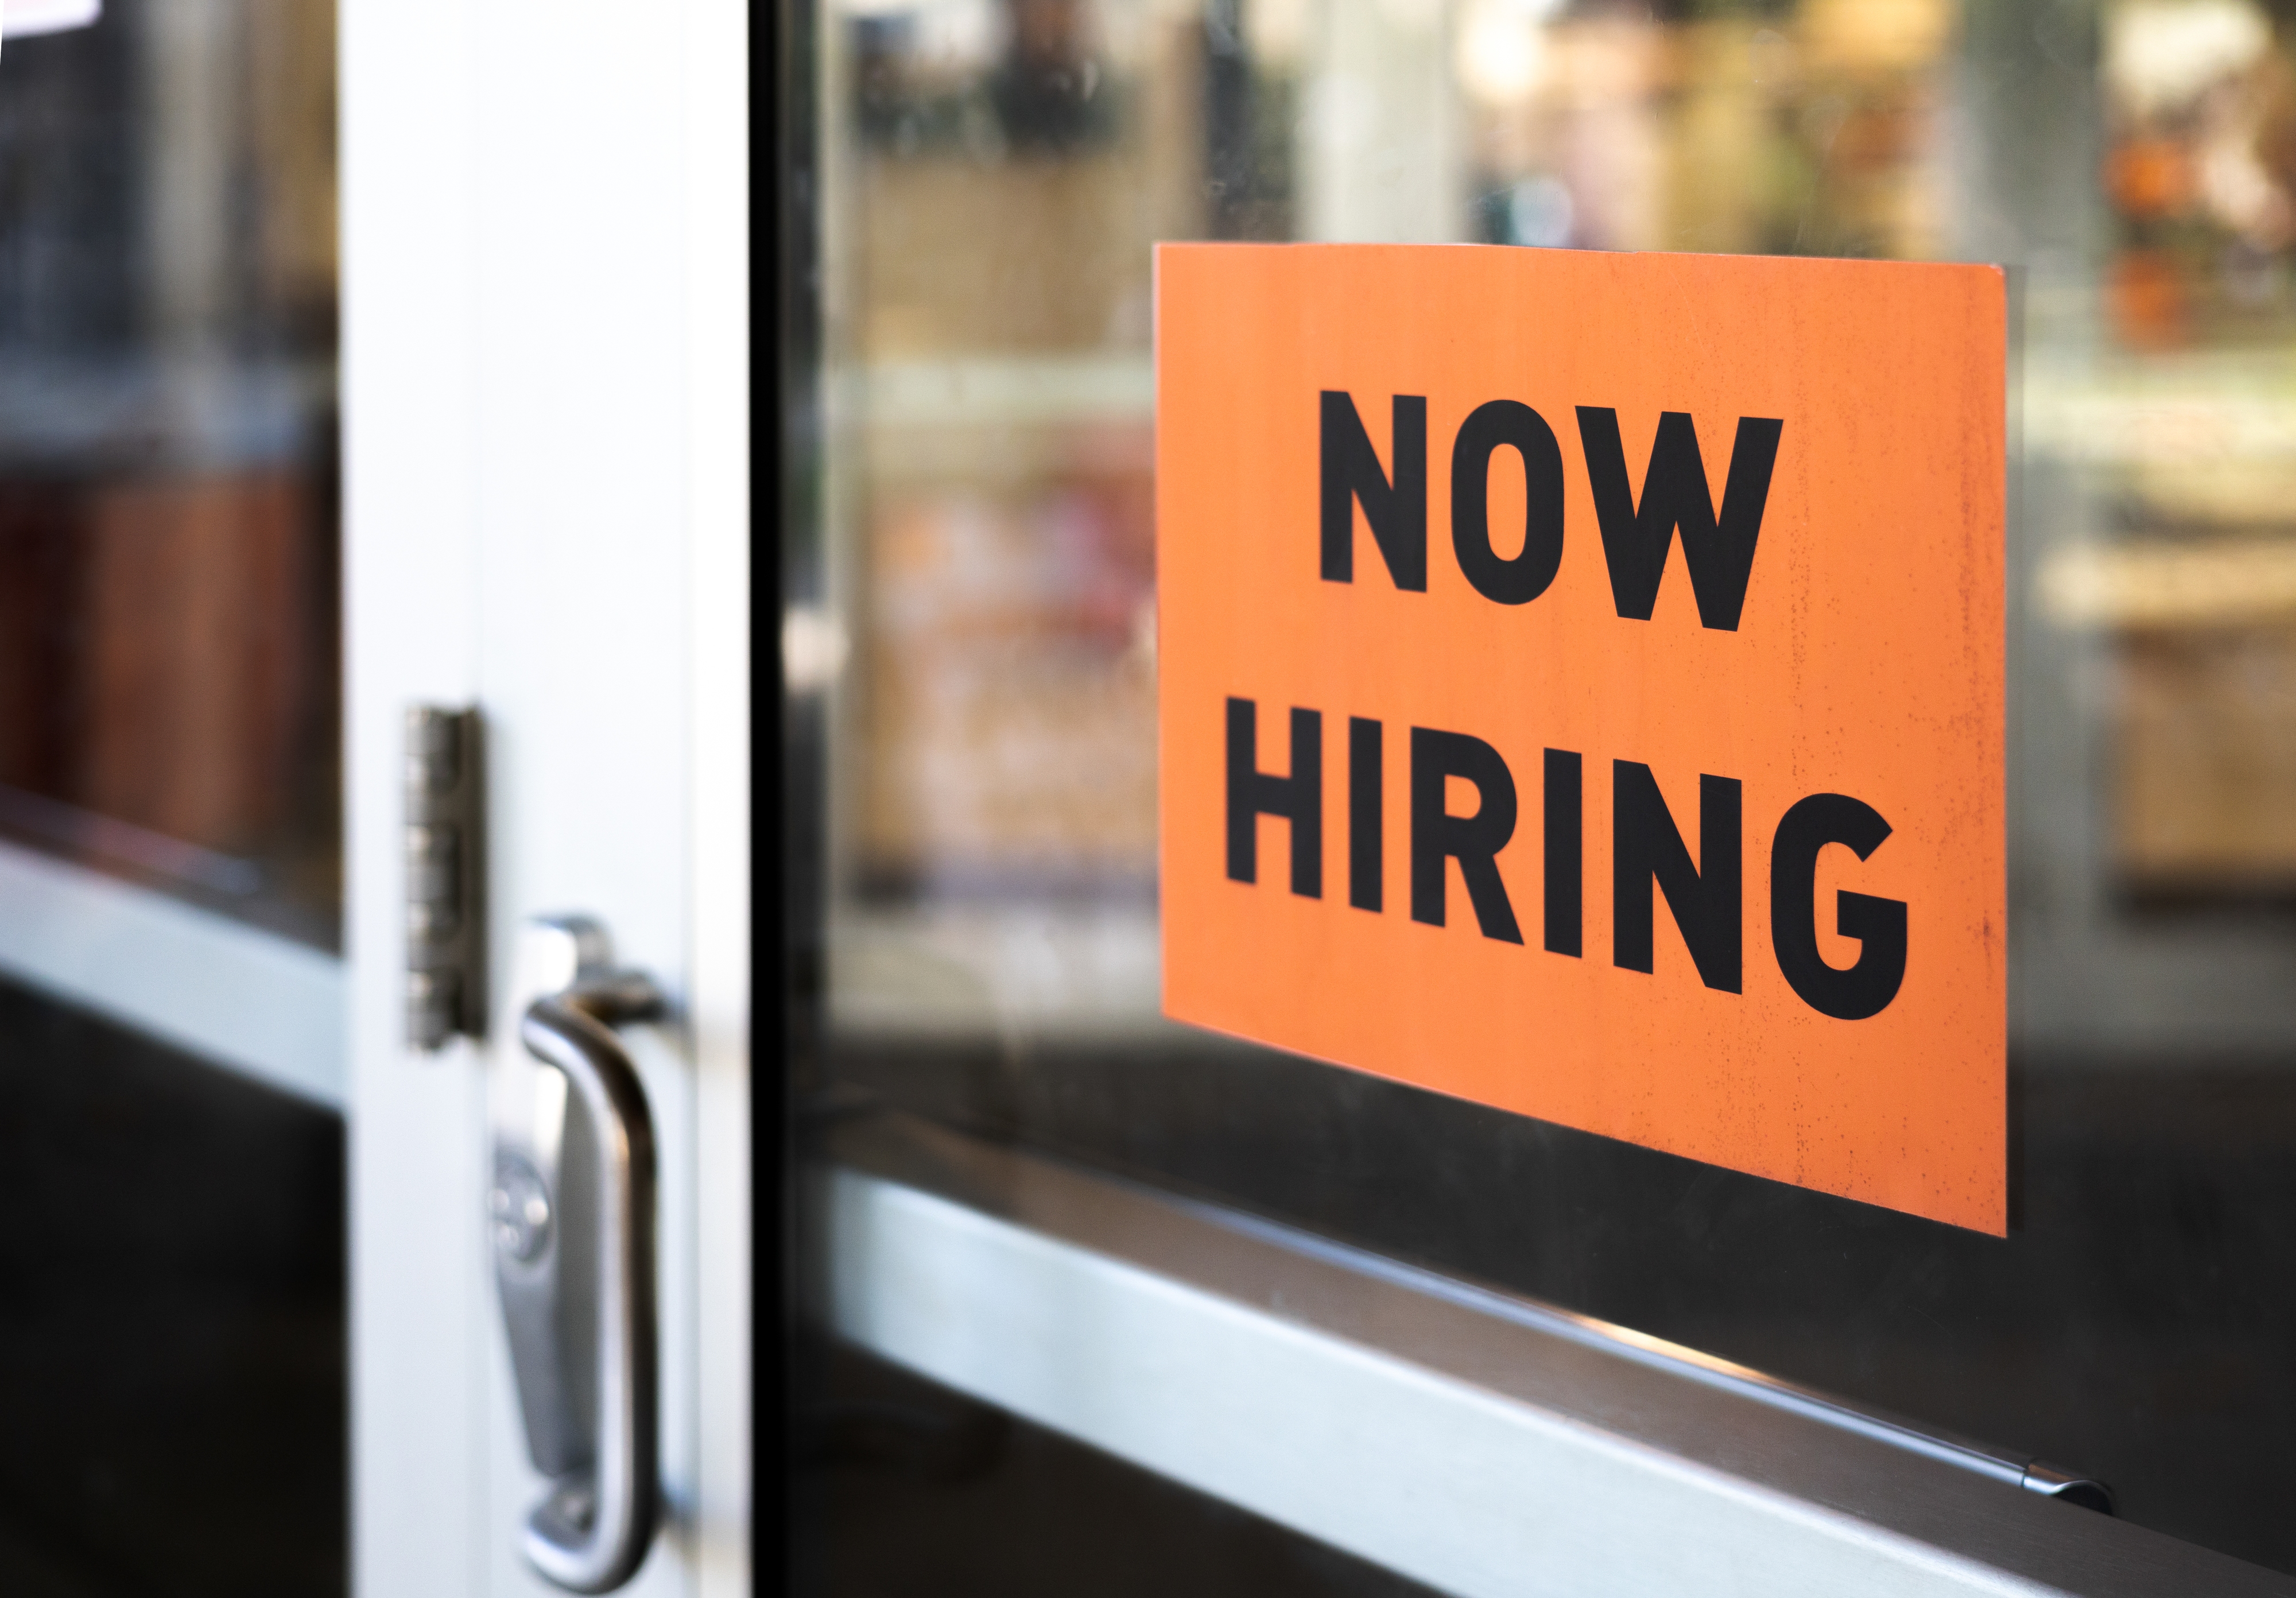 &quot;Now hiring&quot; sign in a window